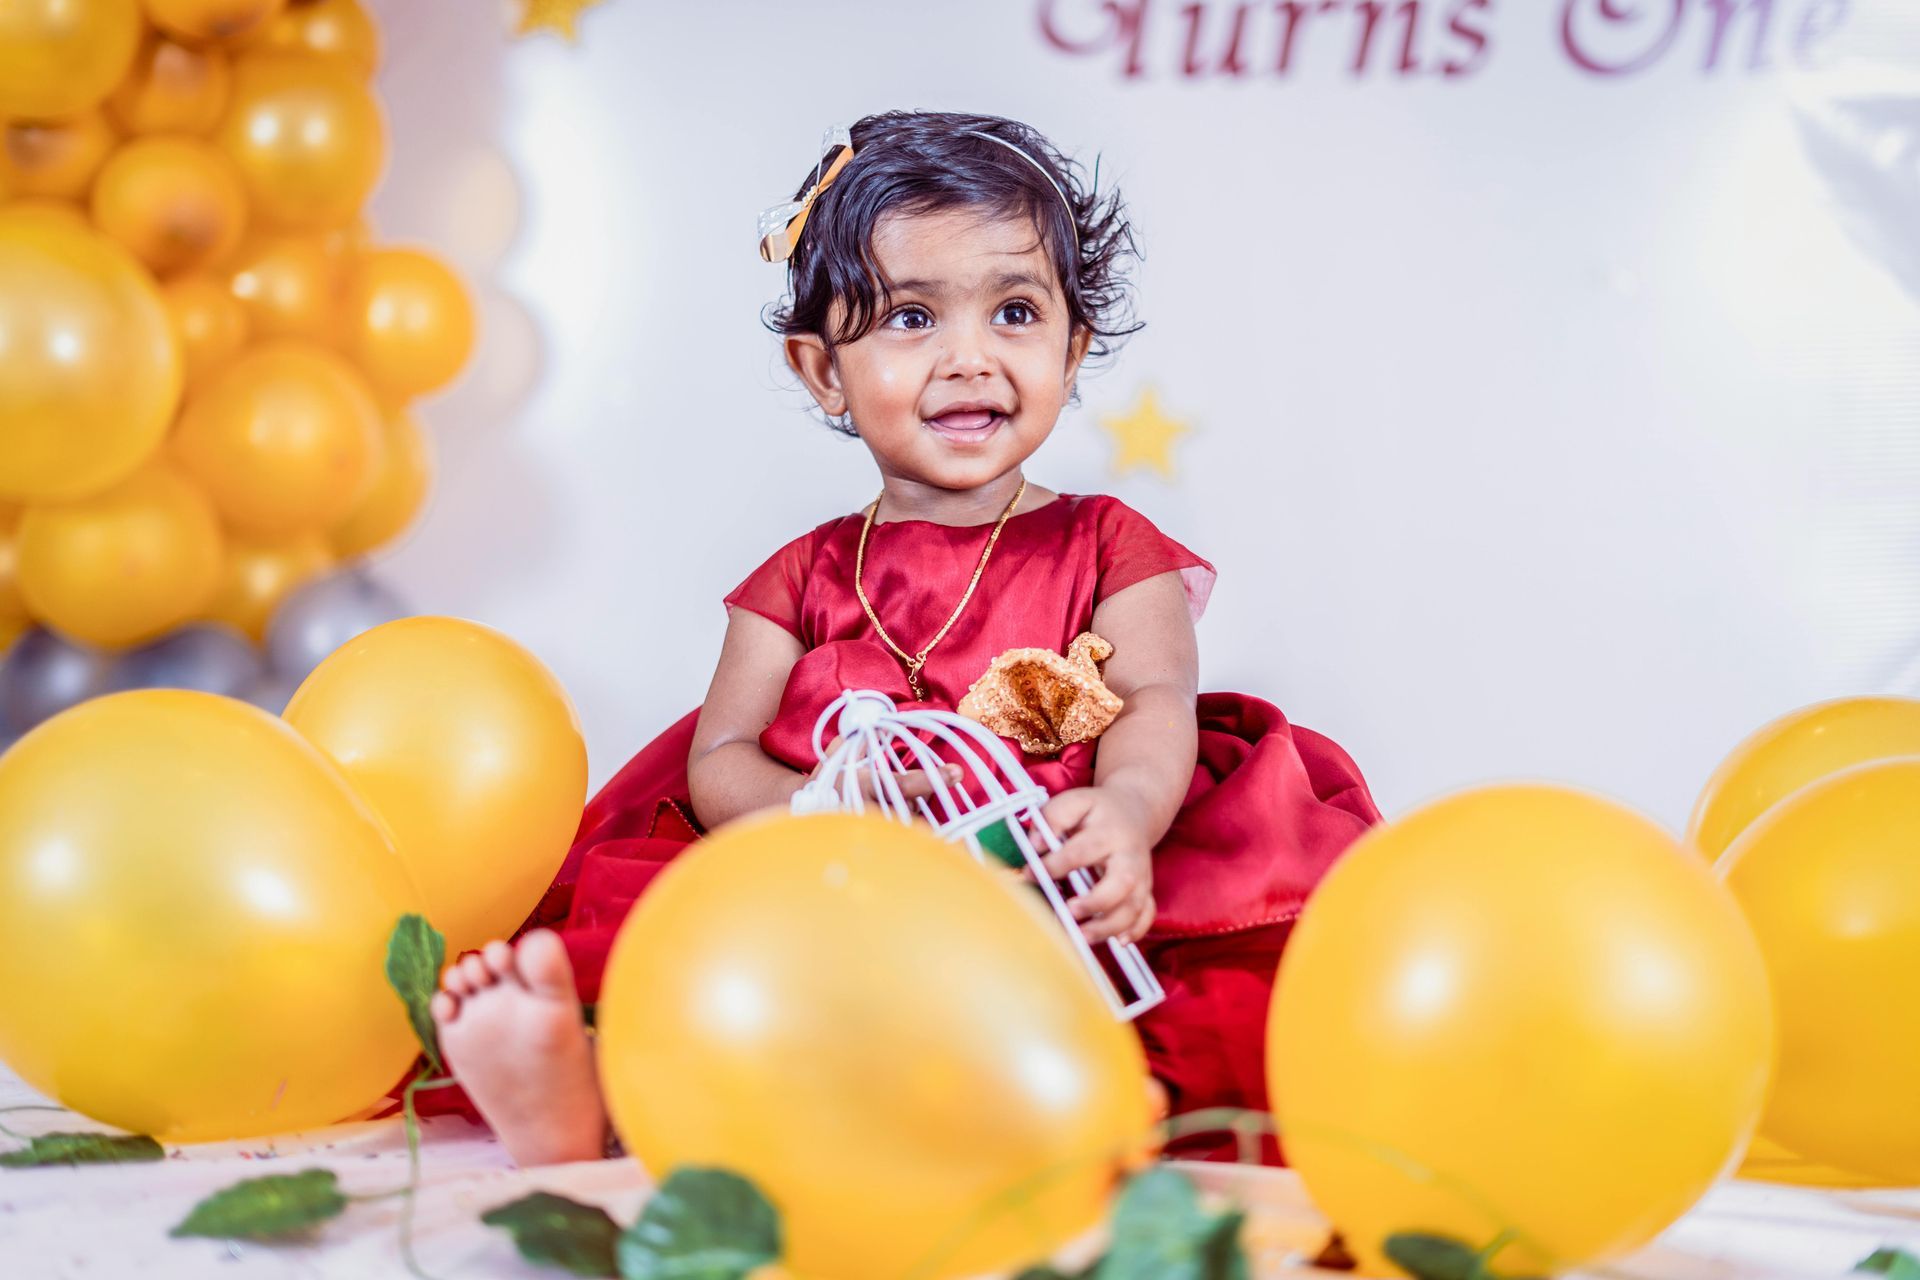 A little girl is sitting on the floor surrounded by yellow balloons.